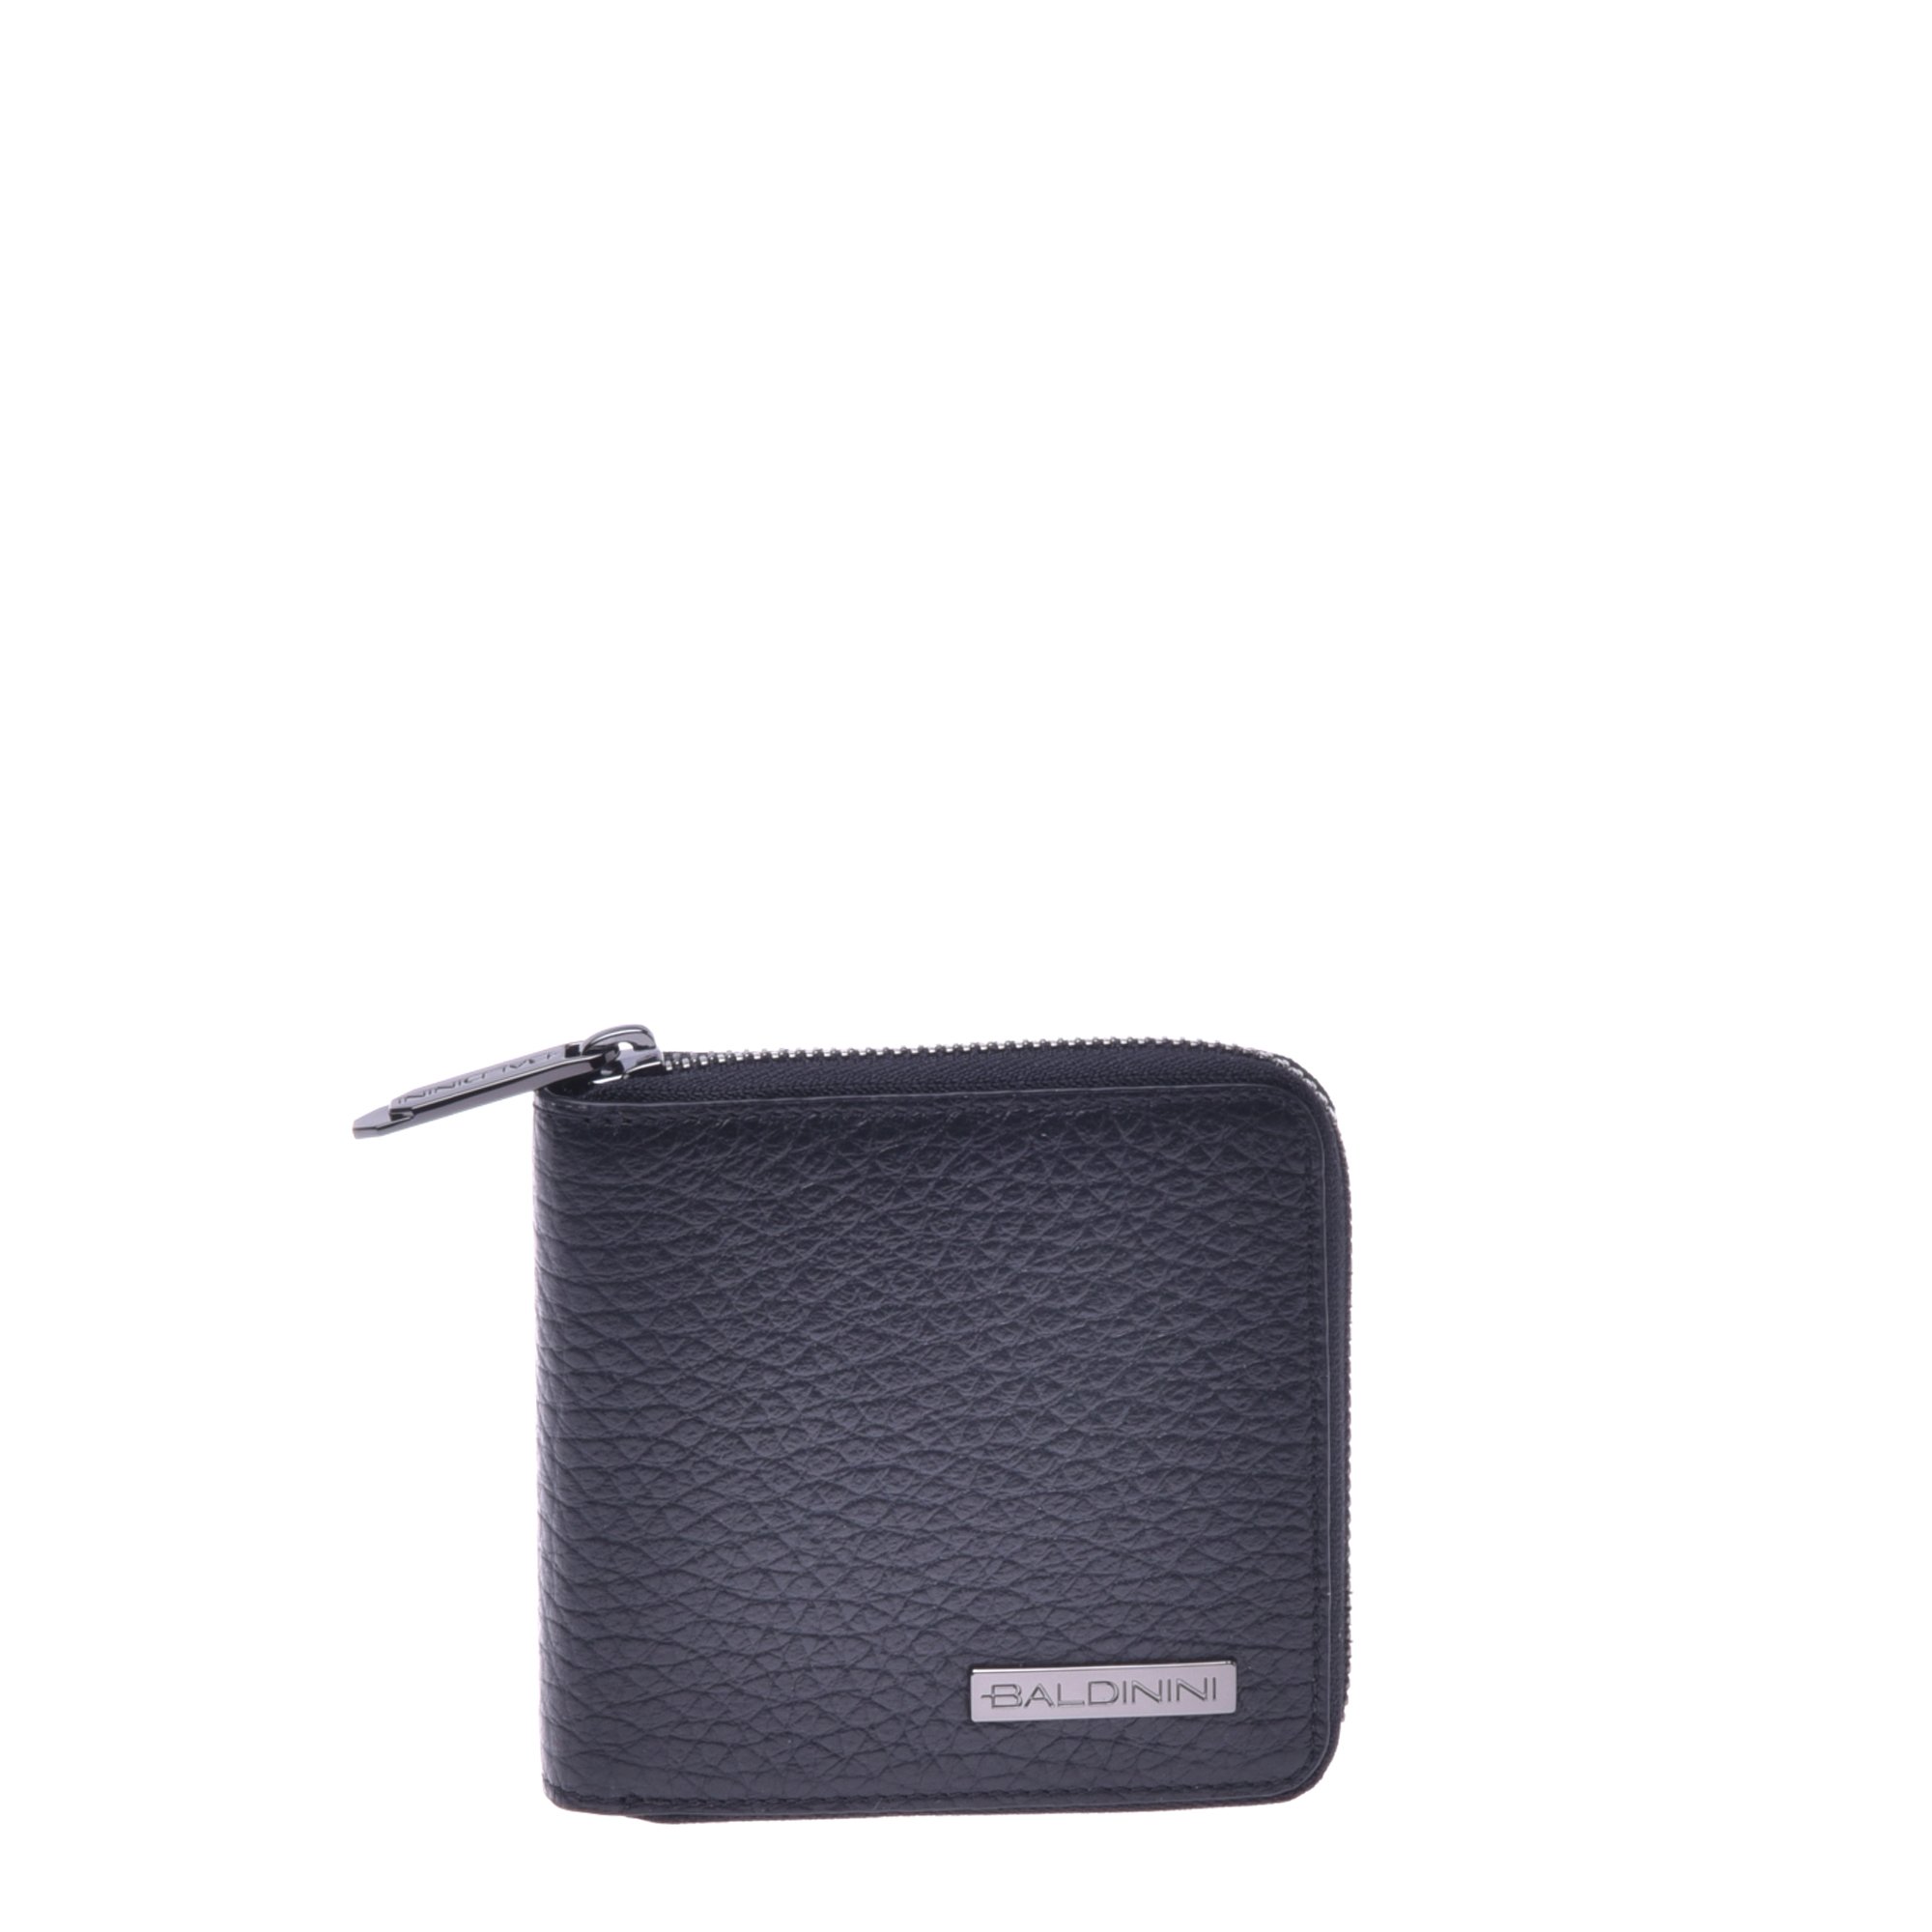 Black tumbled leather wallet with zip image